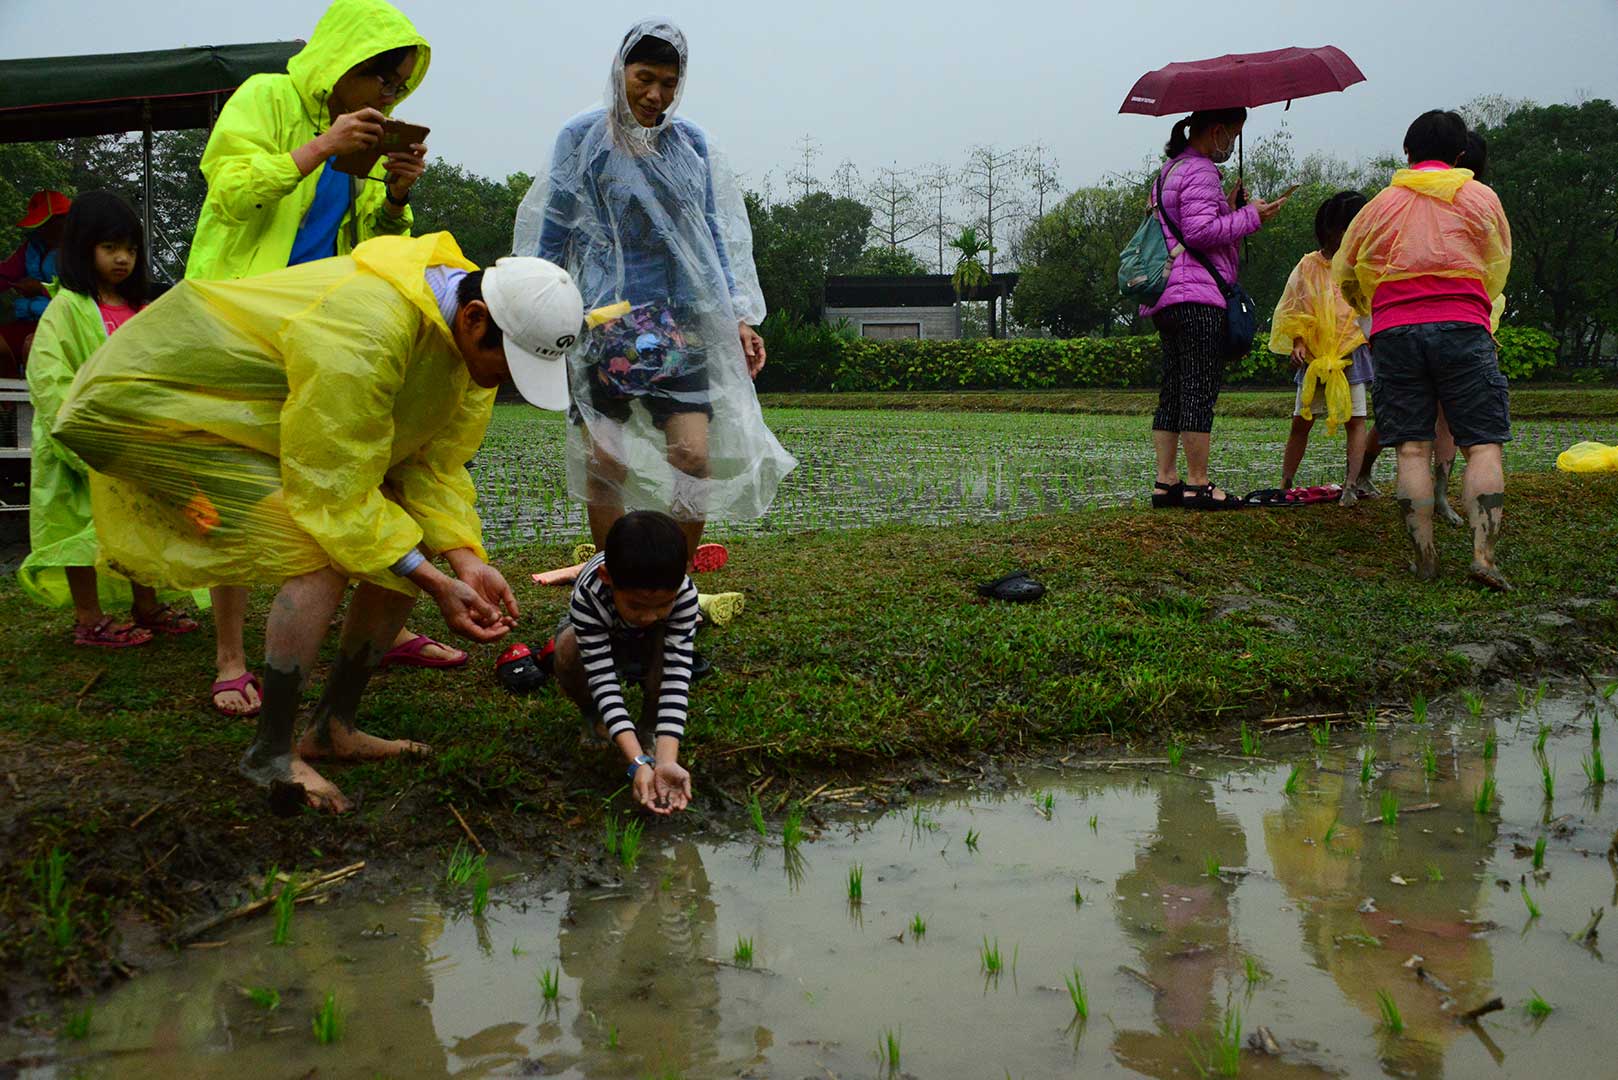 Visitors trying to put eels into the paddy field inside Liudui Hakka Cultural Park